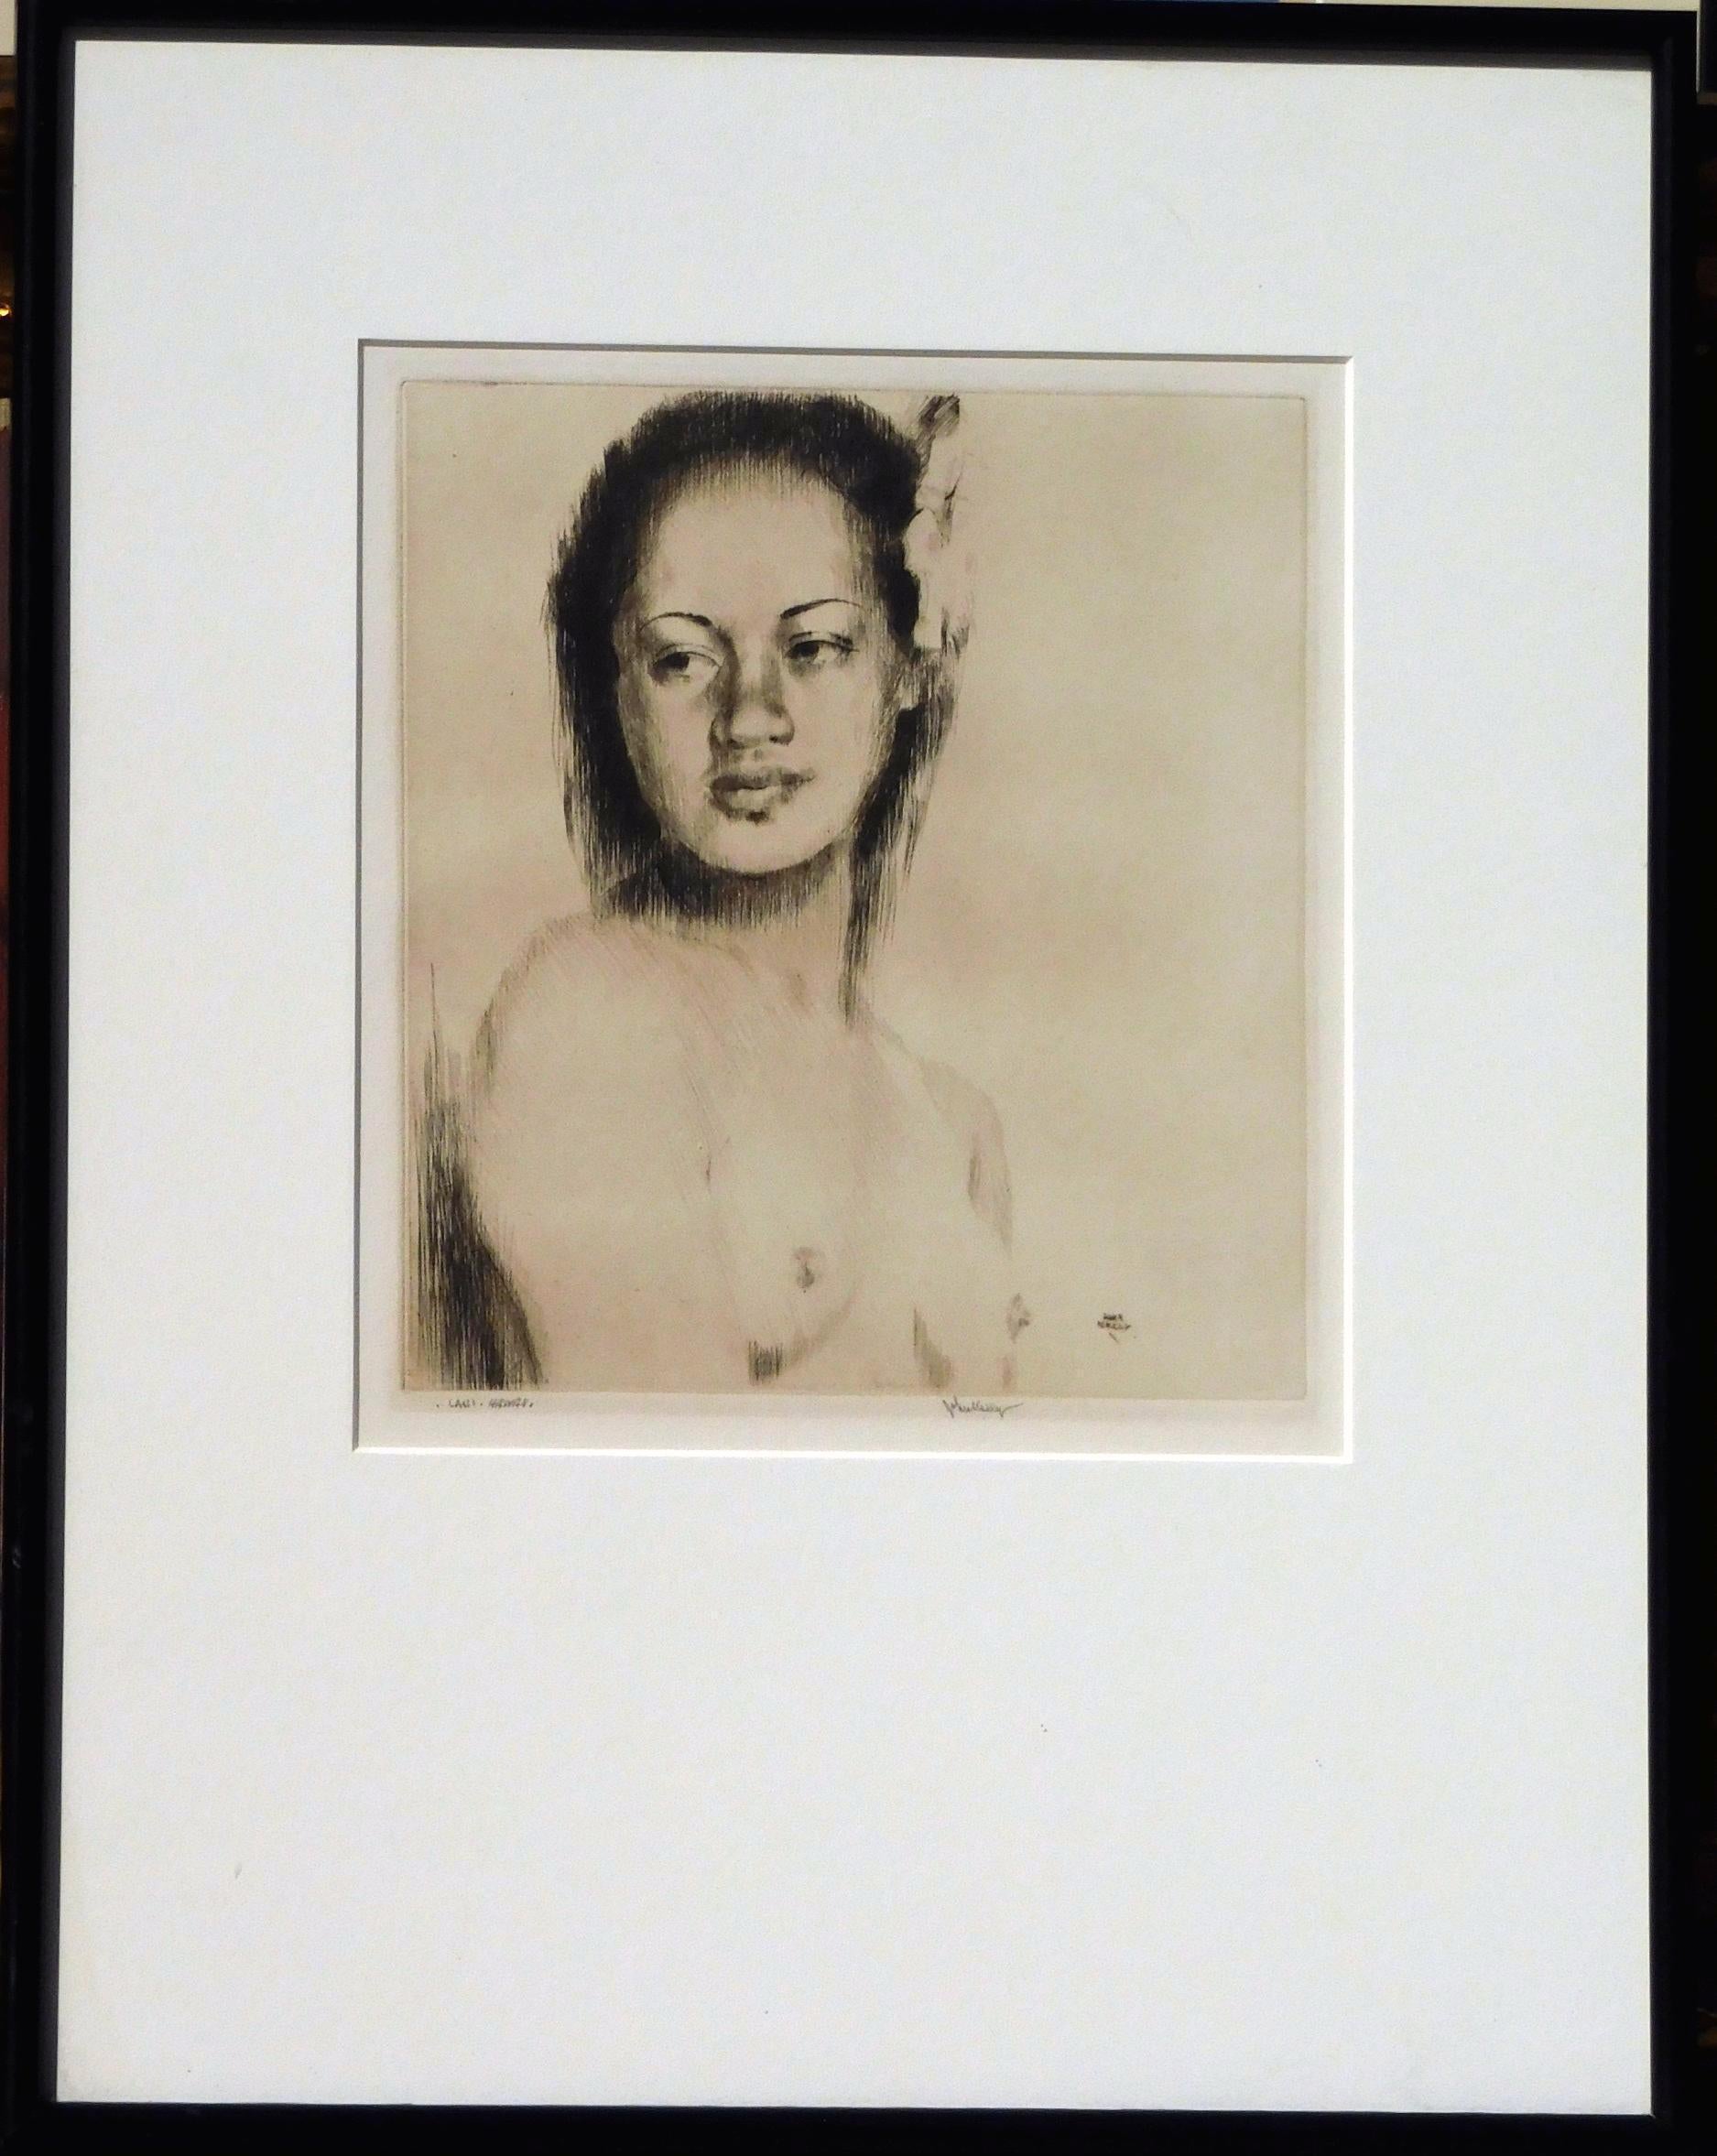 John Melville Kelly drypoint - Hawaiian female subject circa 1930s - 1940s.
Signed lower right in pencil, John Kelly. Titled lower left in pencil “Lani - Hawaii.”
A wonderful impression with full margins in excellent condition.
Image size 8 3/4 x